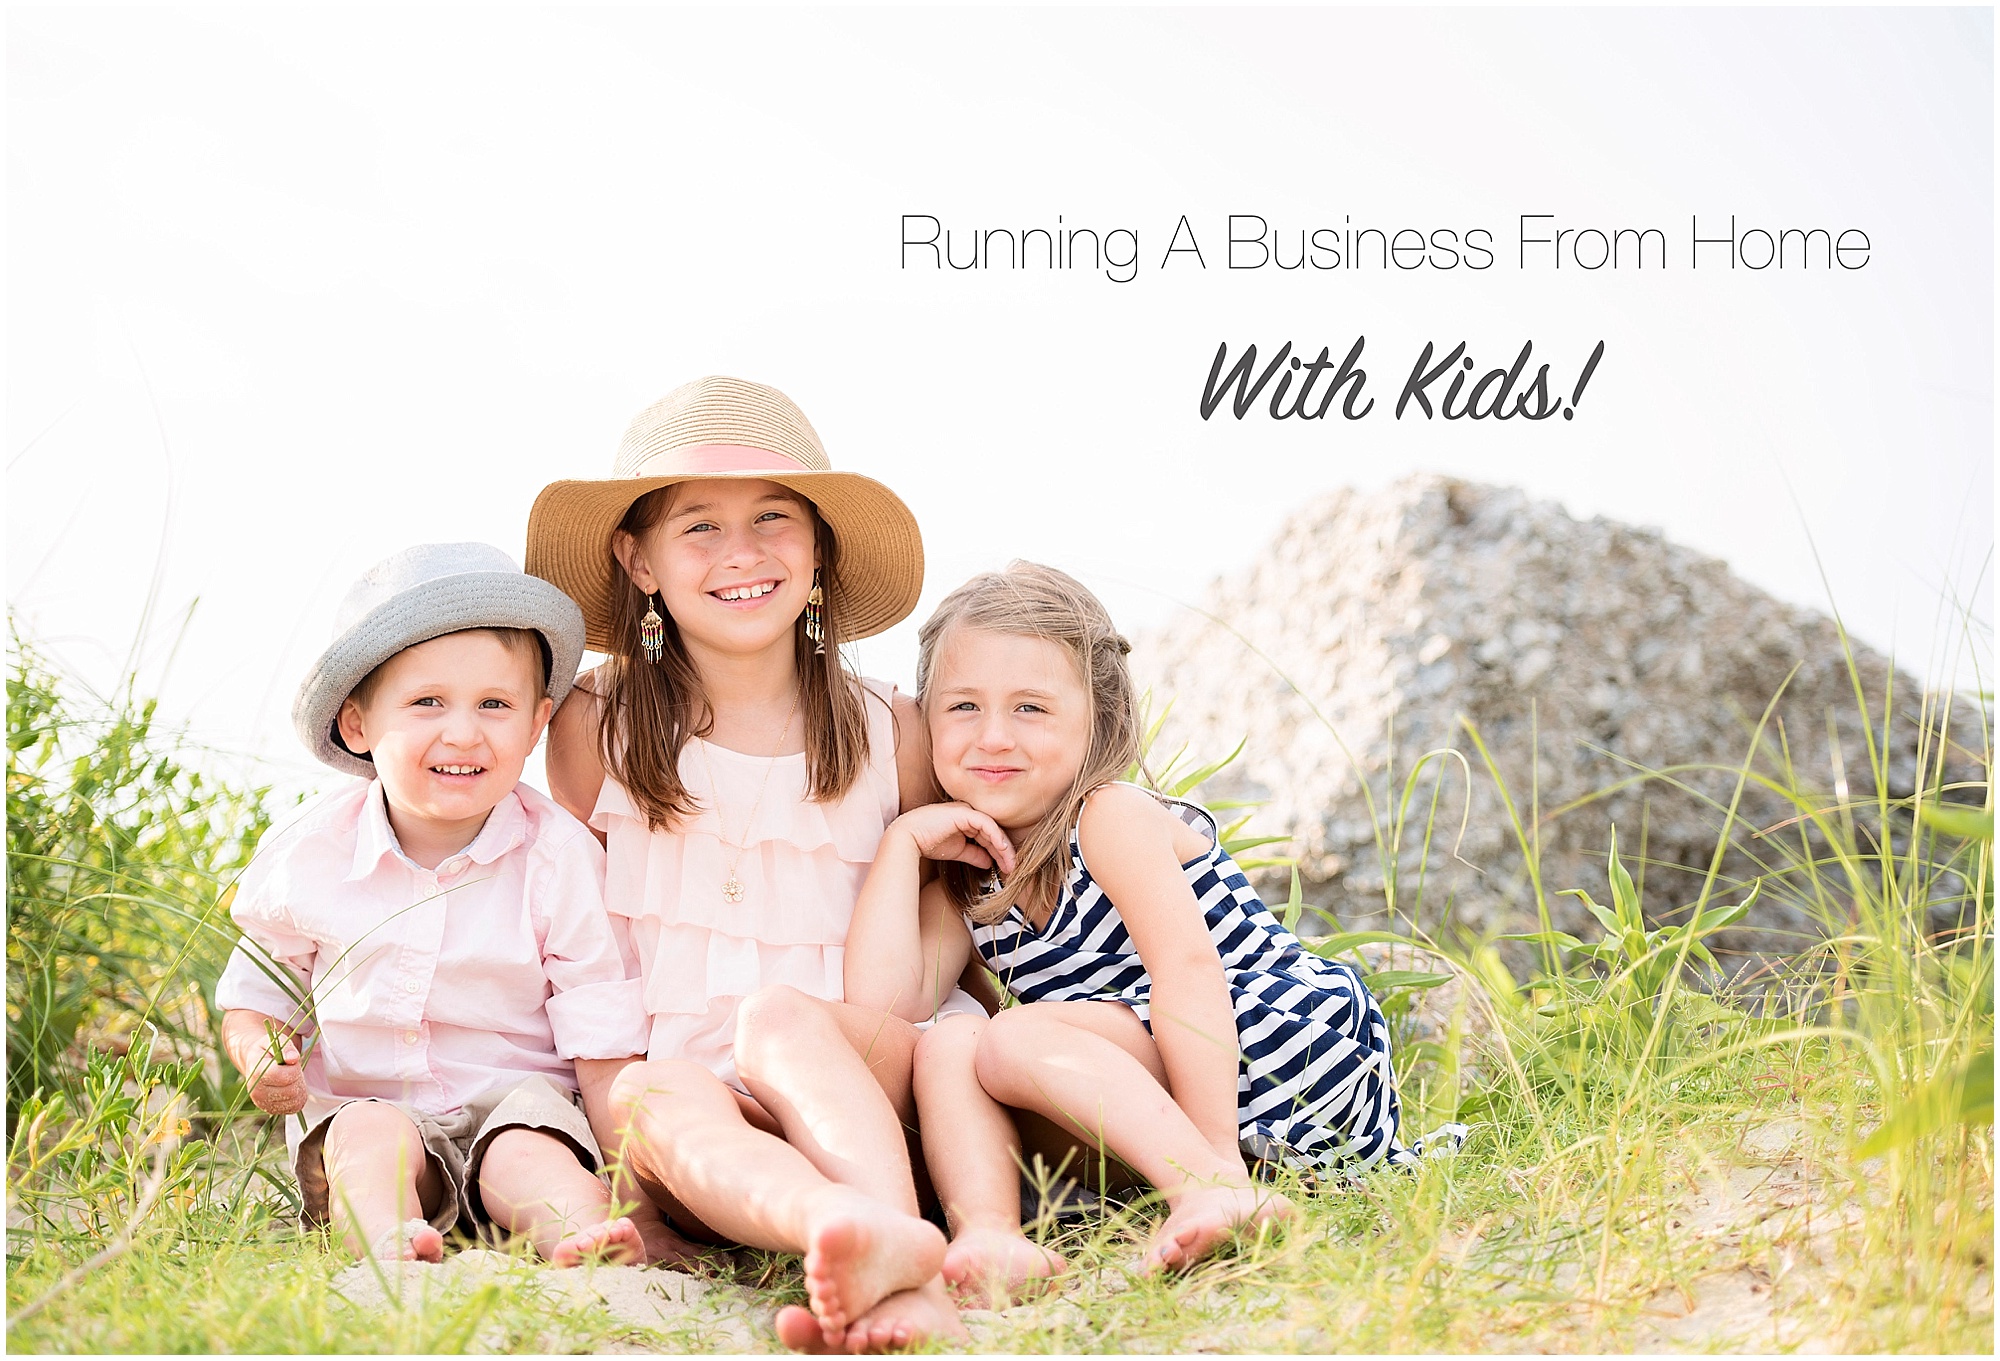 Running A Business From Home With Kids